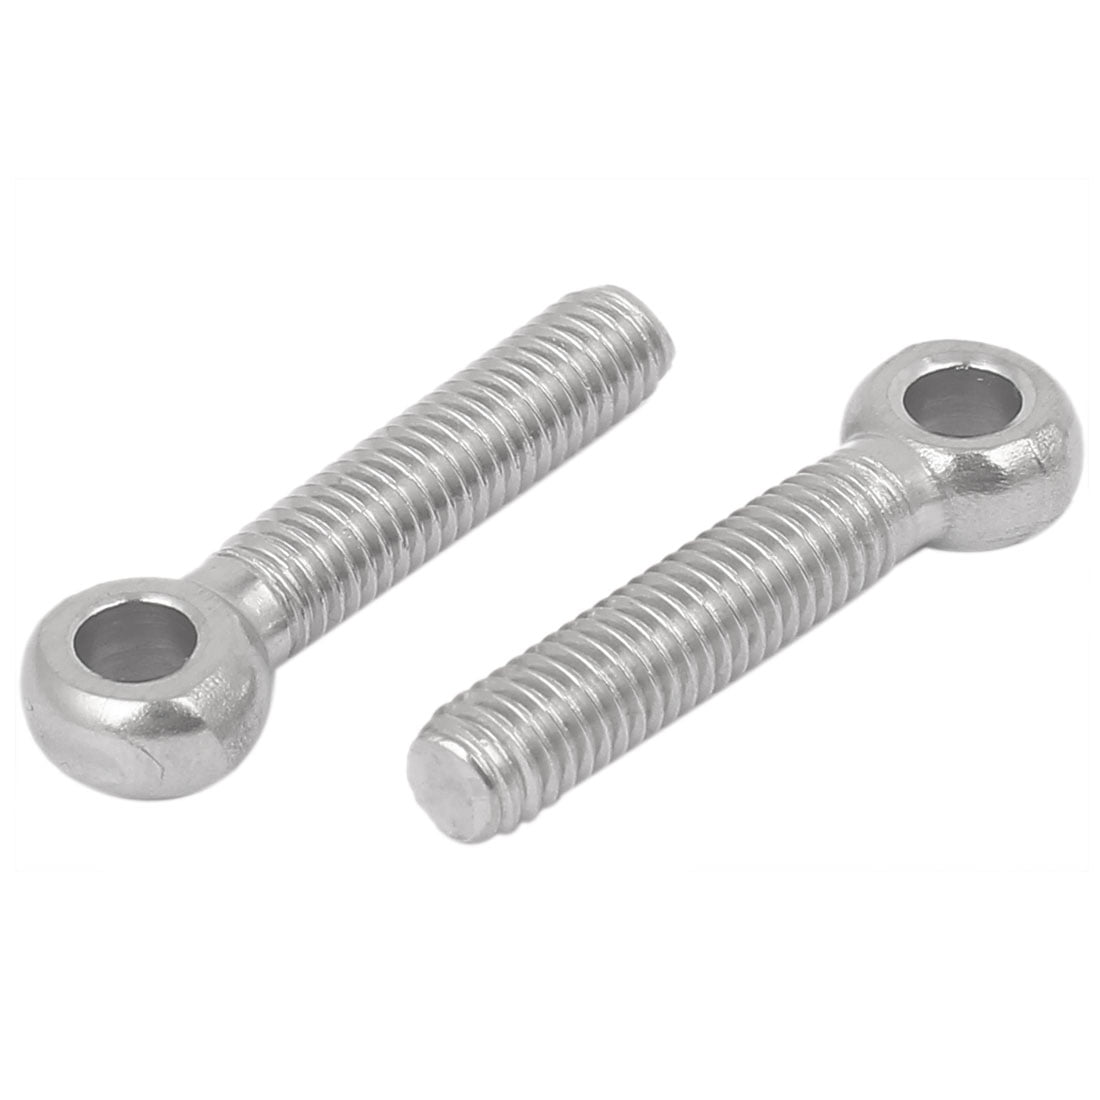 uxcell M5 x 25mm 304 Stainless Steel Machine Shoulder Lift Eye Bolt Rigging 4pcs 